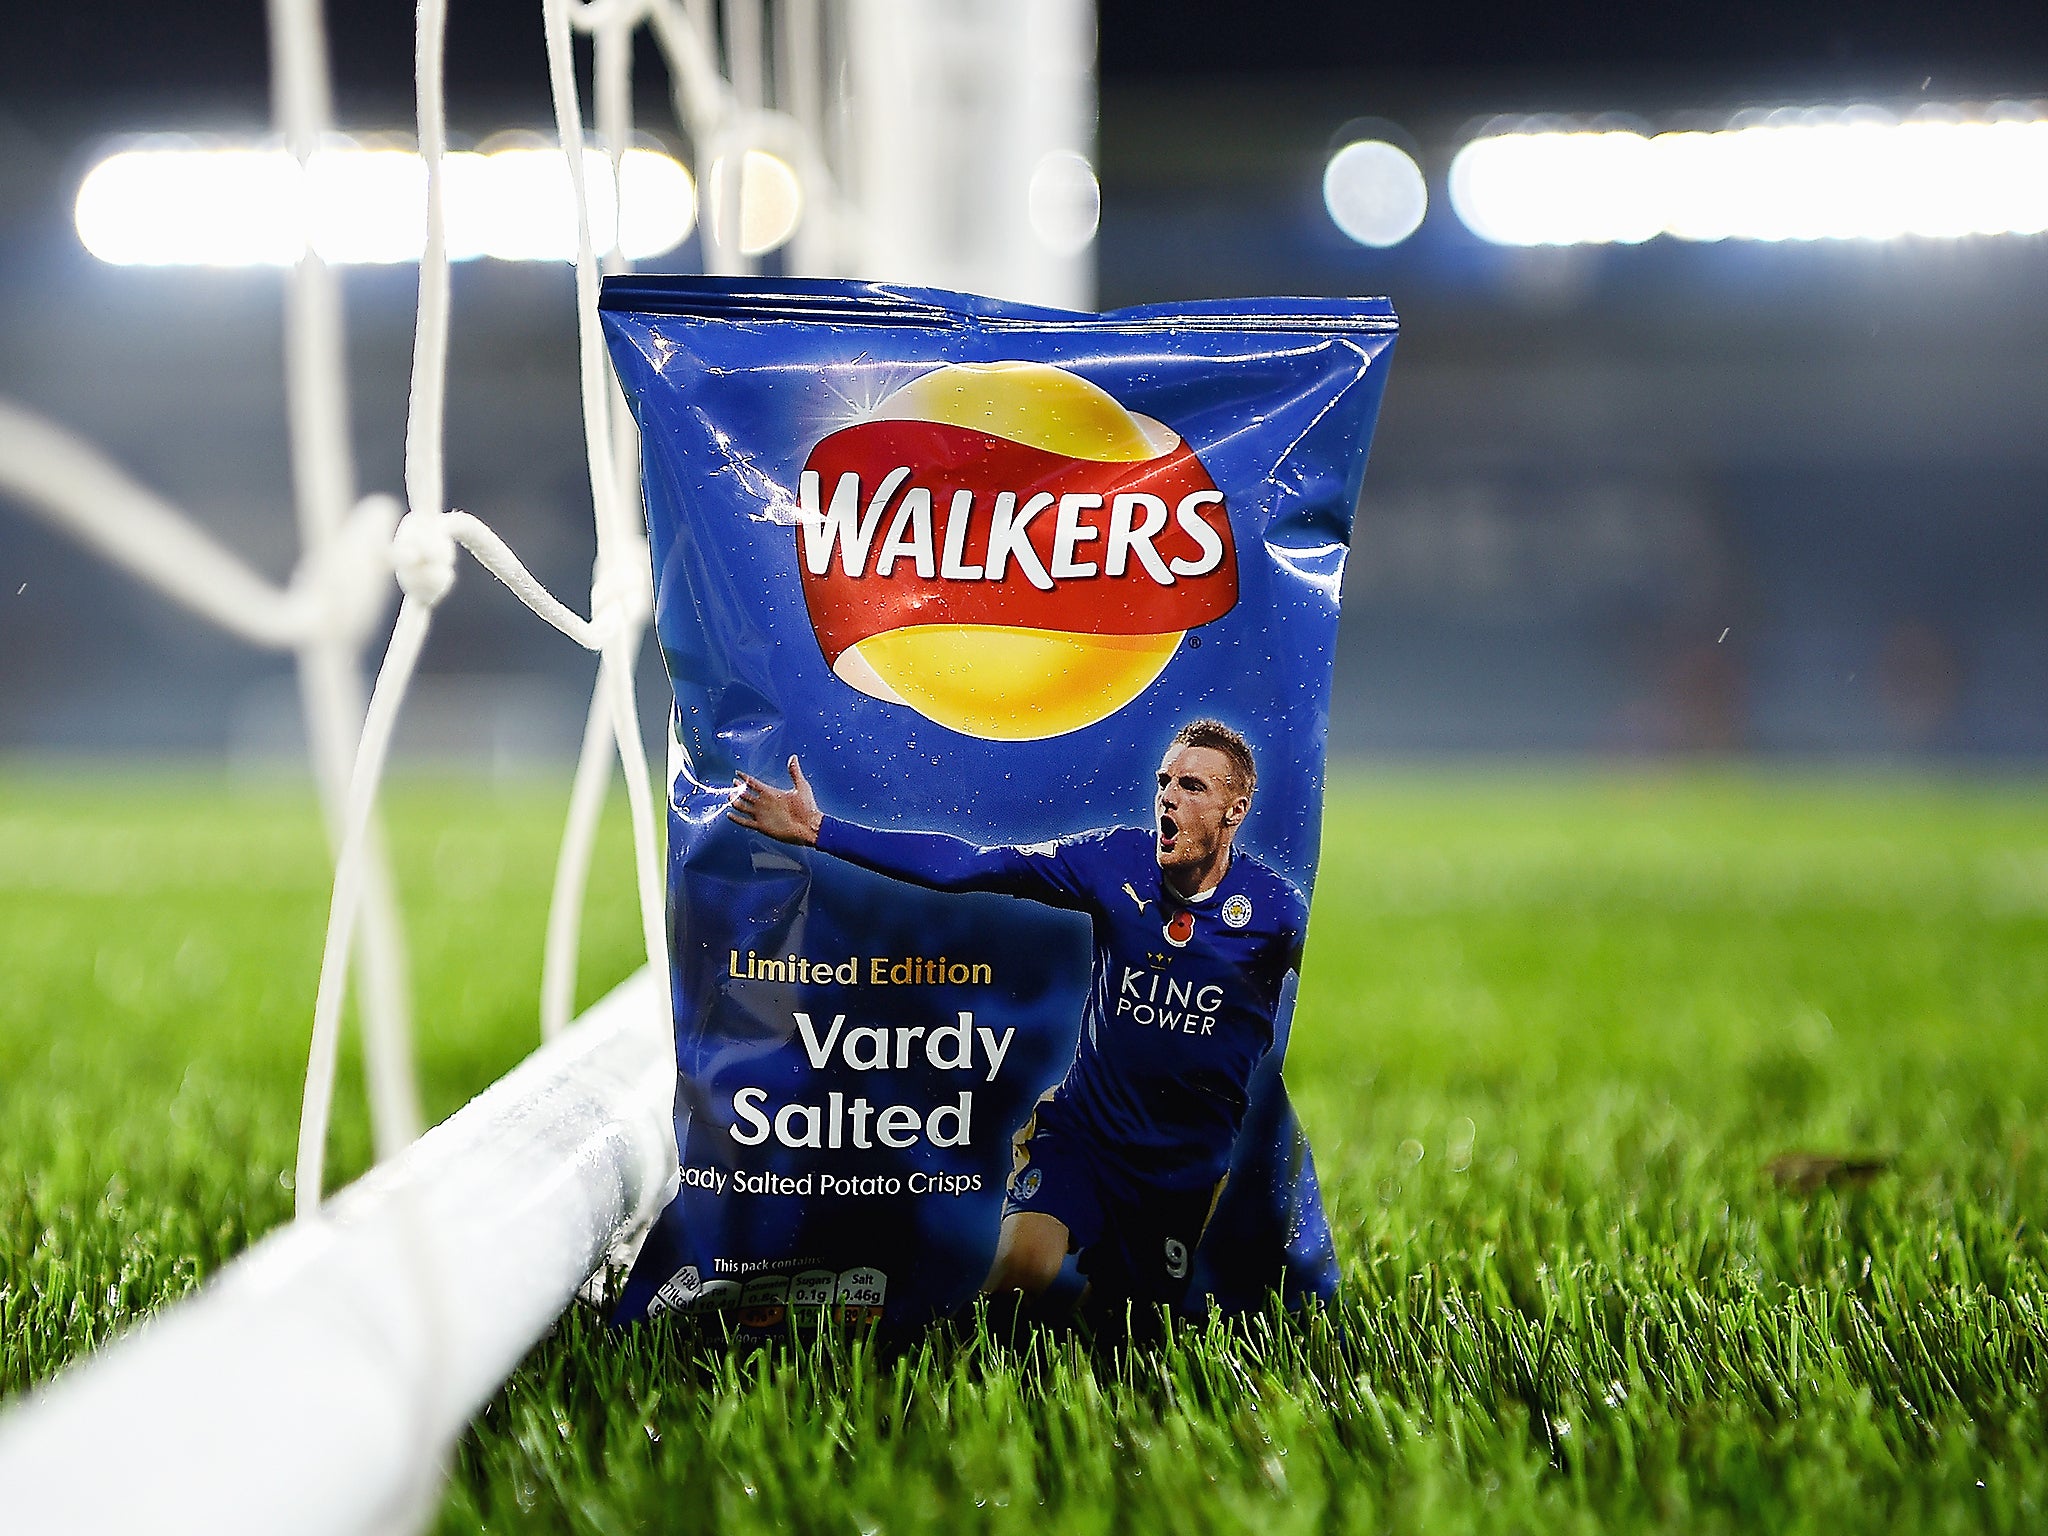 The packets of Walkers Crisps have been released in honour of Vardy's record breaking 11 game goal scoring run in the Barclays Premier League